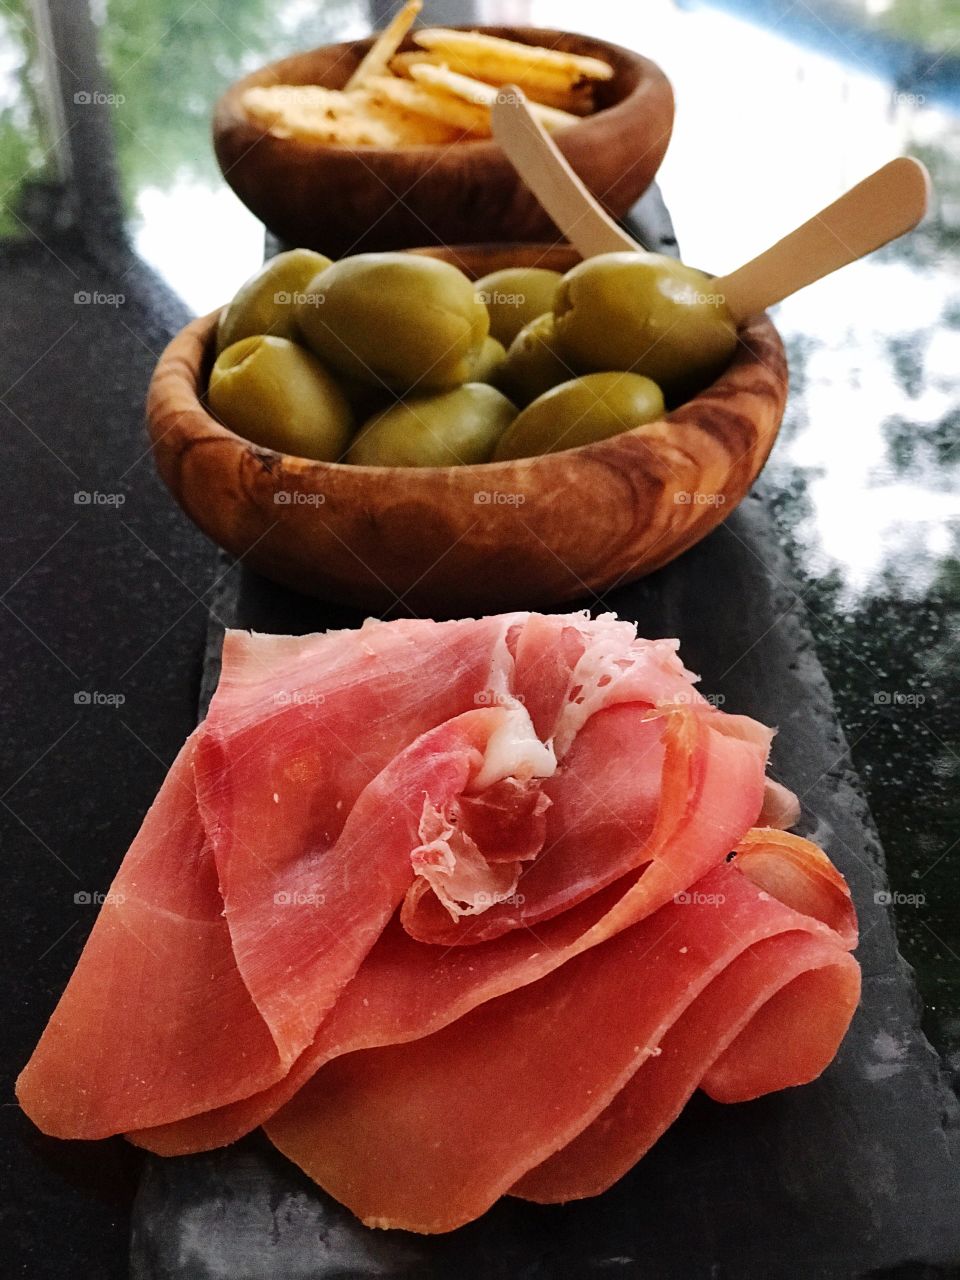 Tapa plate with ham and green olives